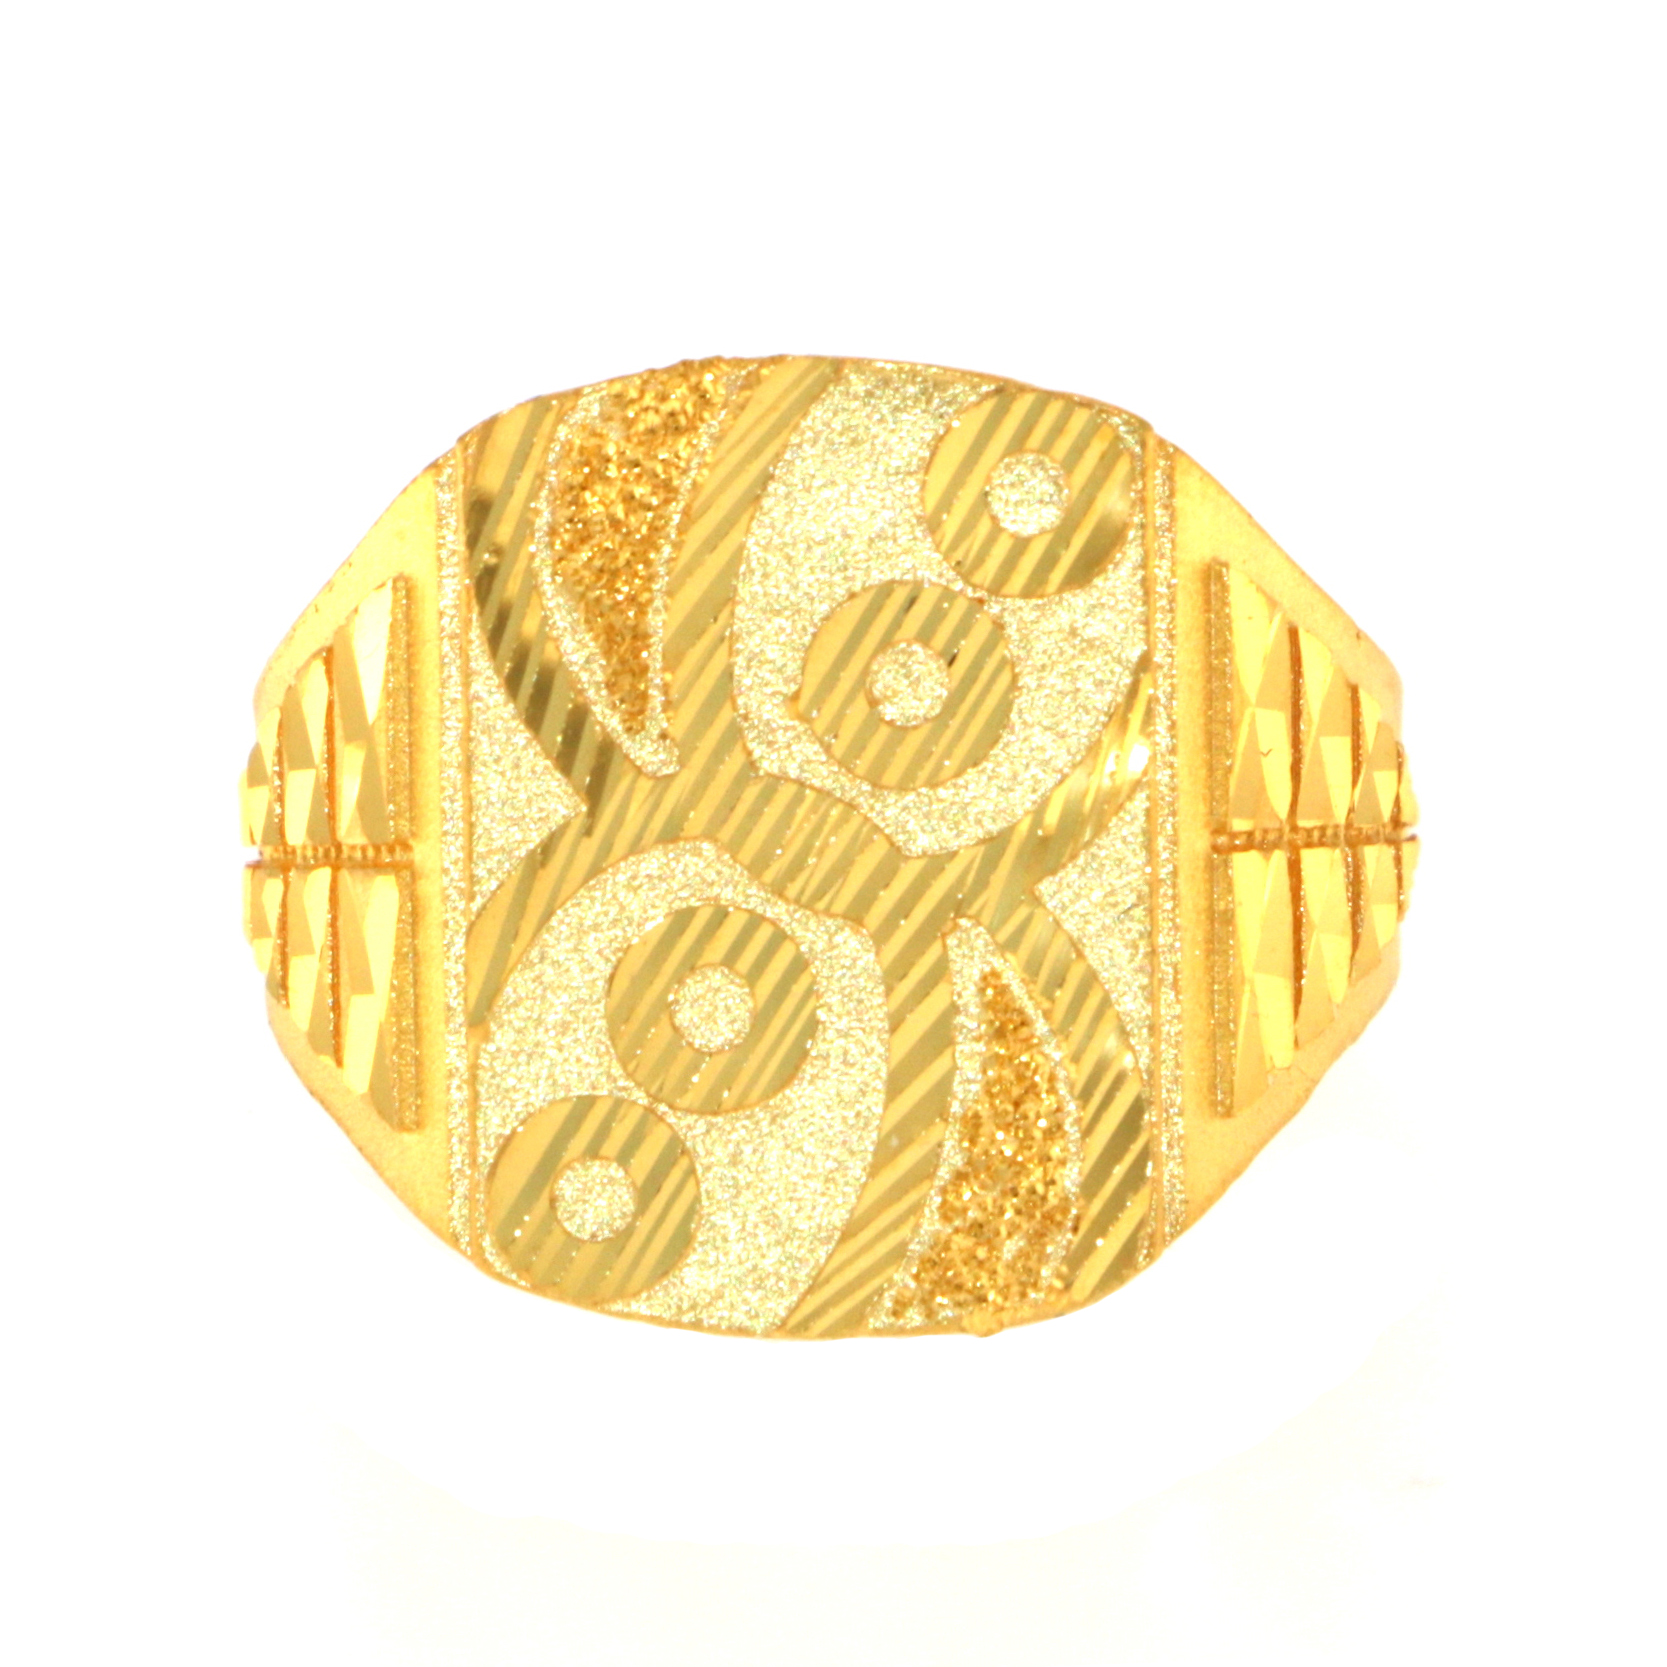 22ct Gold Gents Ring